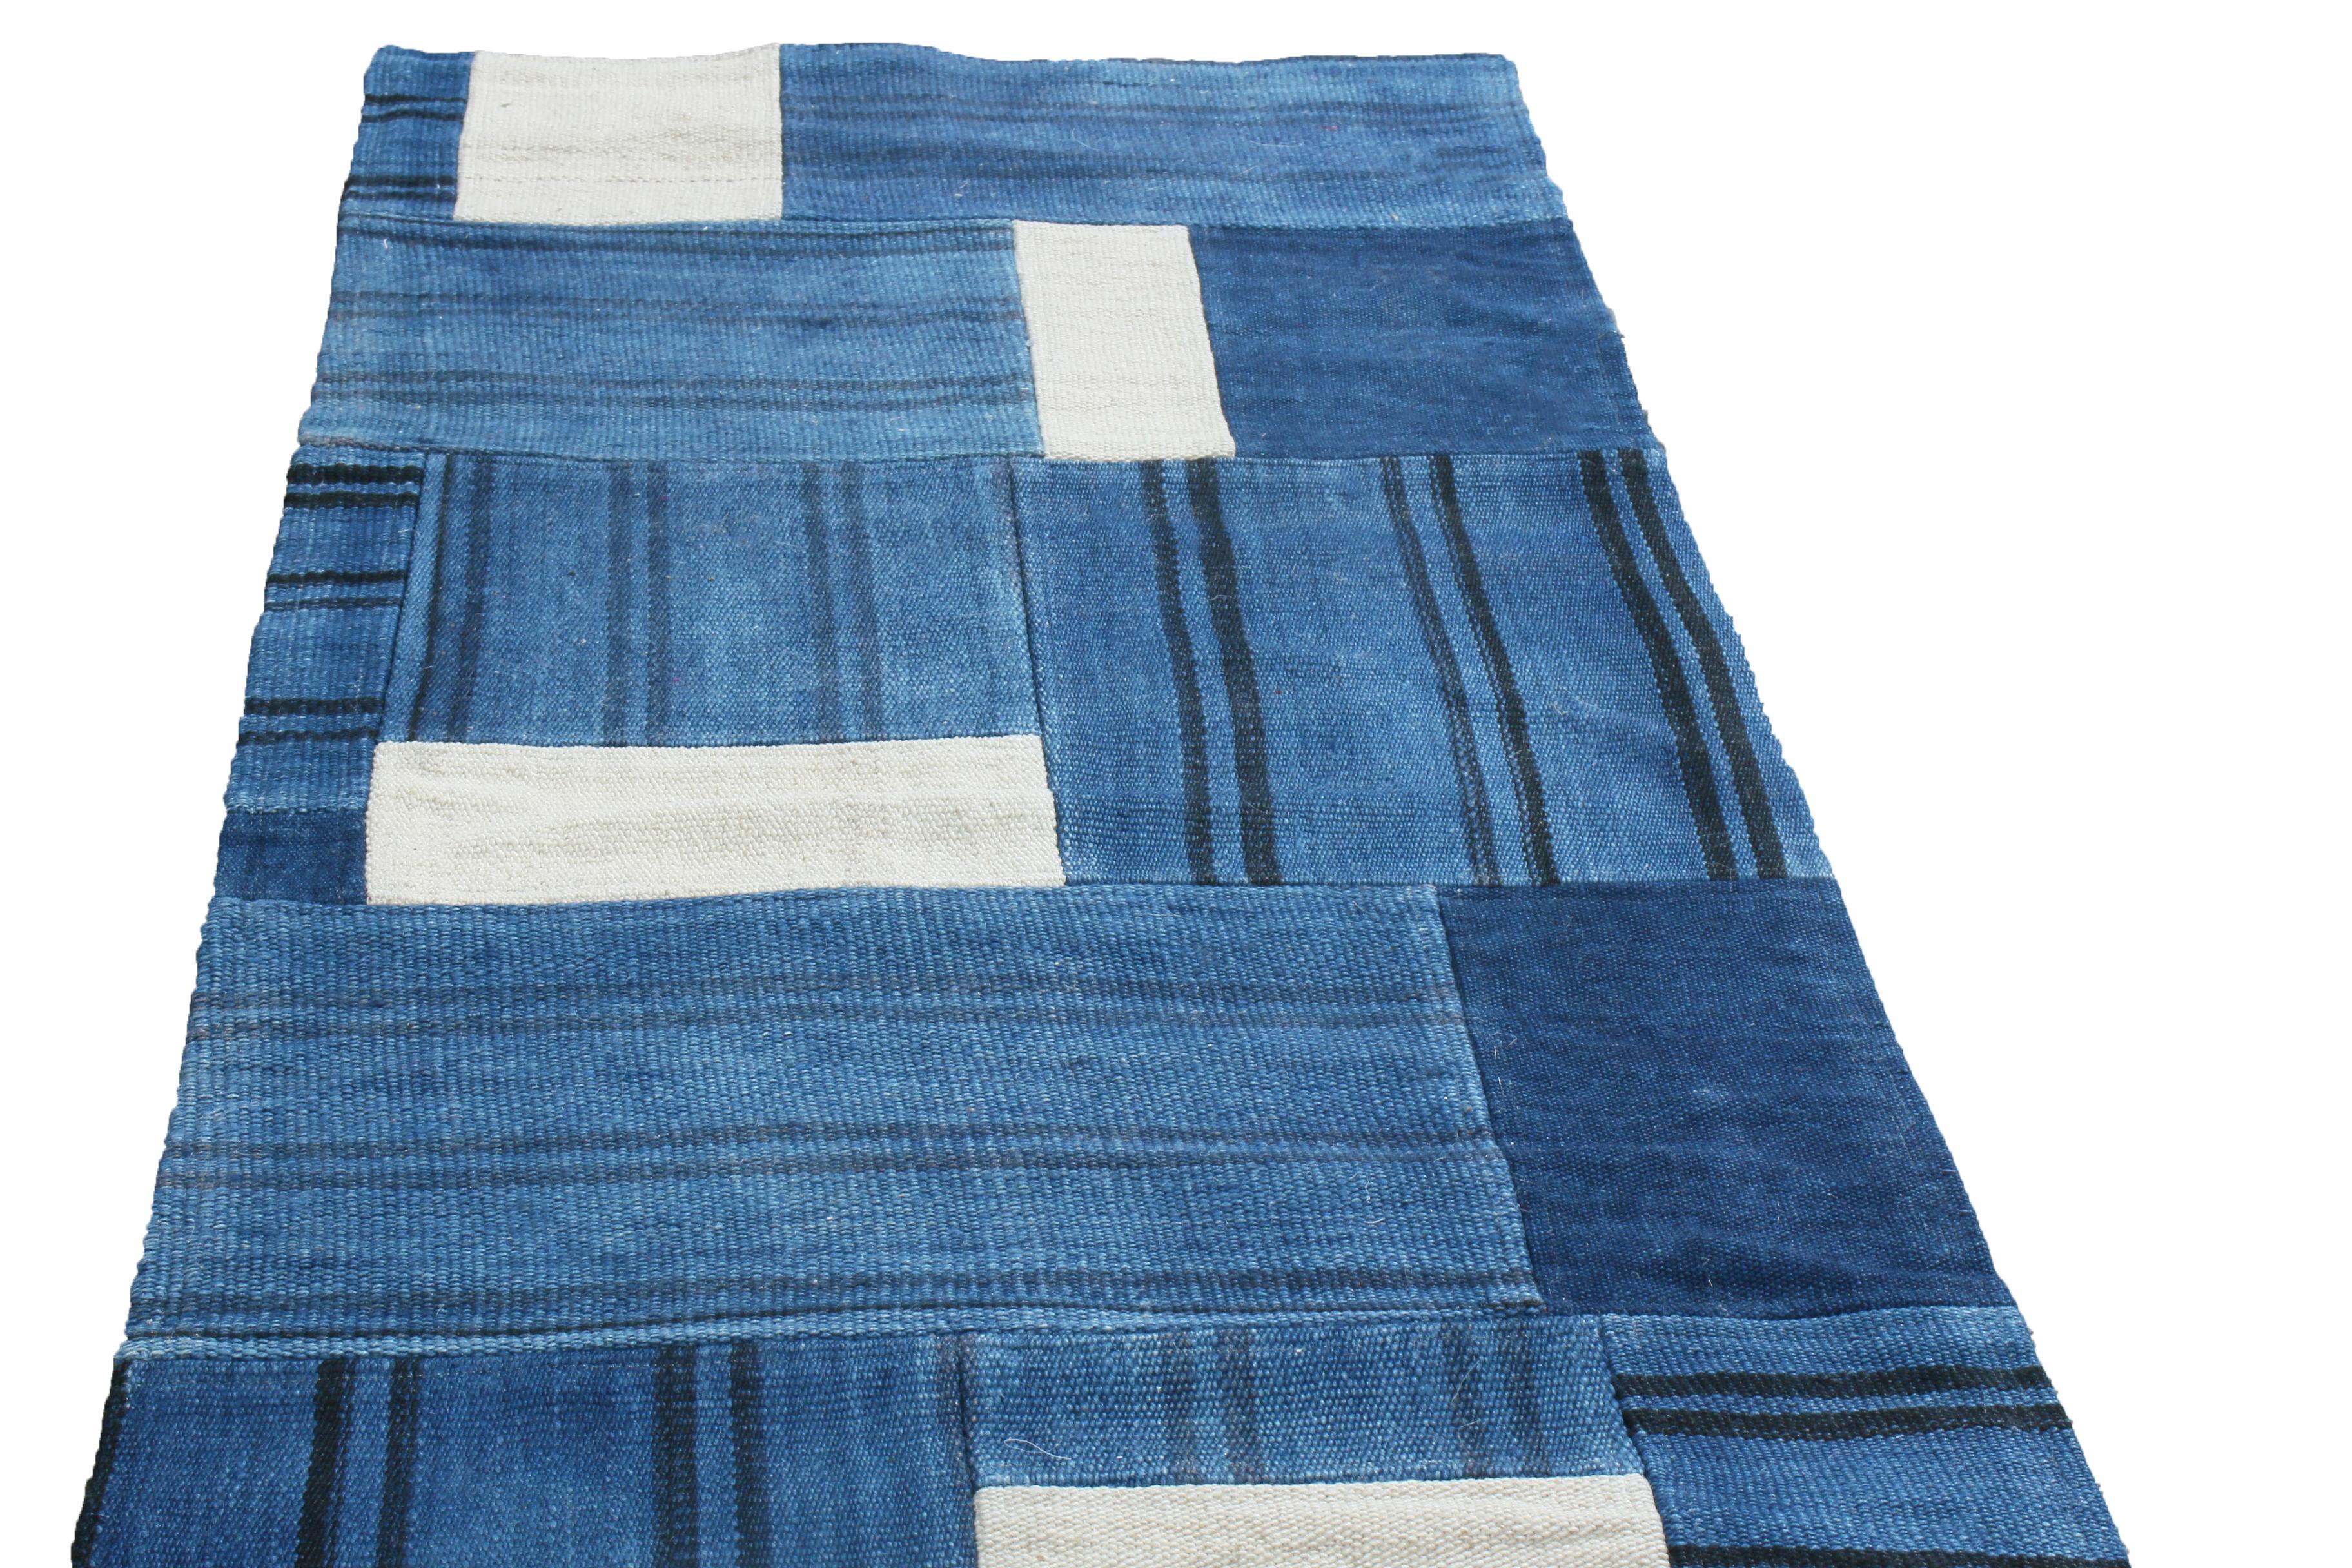 Originating from India, this contemporary wool runner enjoys a patchwork geometric field design with abrash hues of abrash Prussian blue, white, and linear black colourways in a borderless, conservative design.